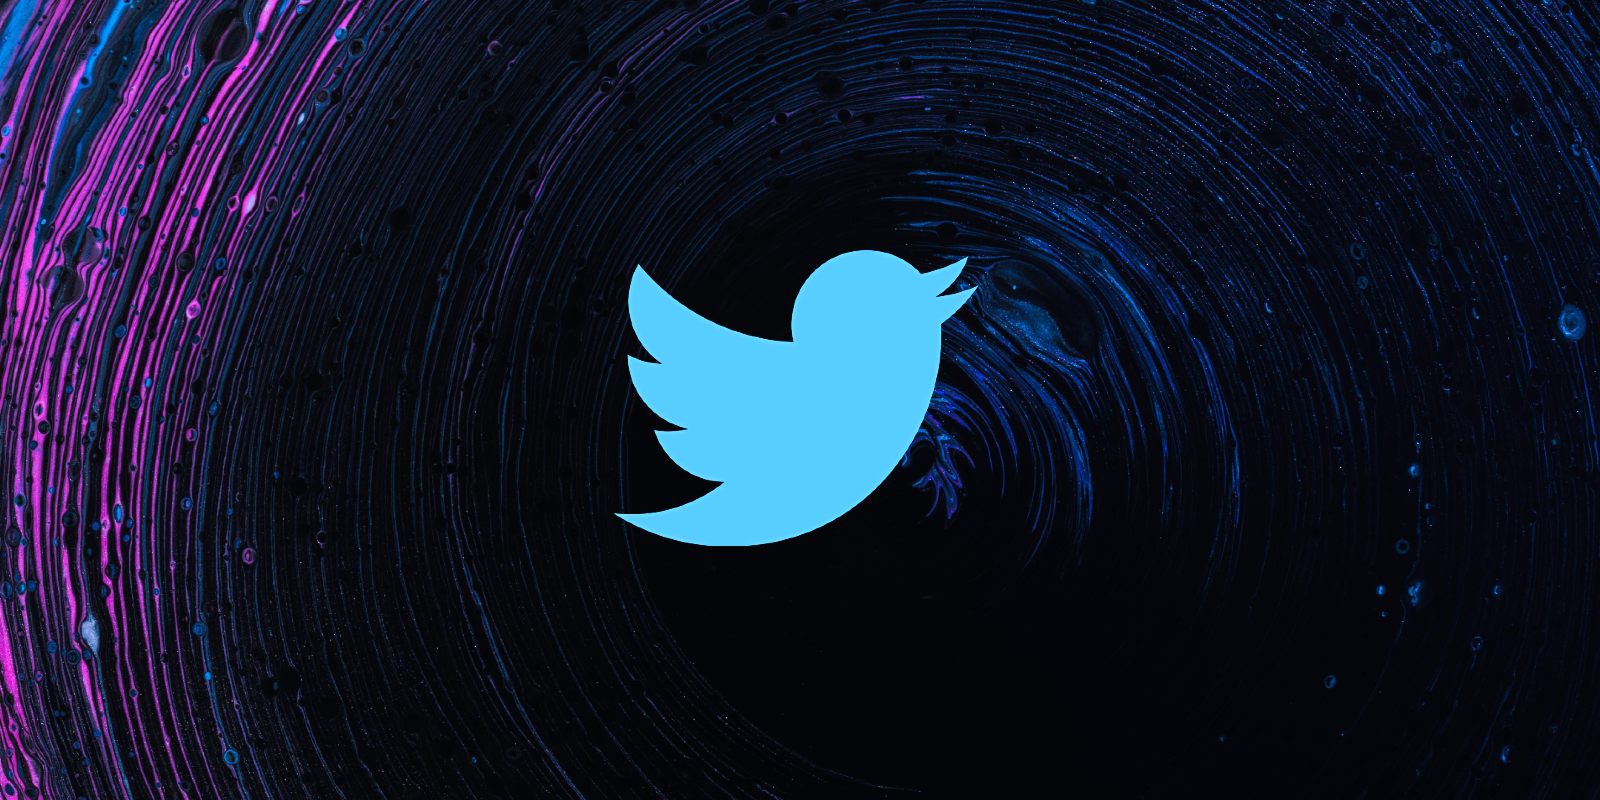 Teen hacker agrees to 3 years in prison for Twitter Bitcoin scam